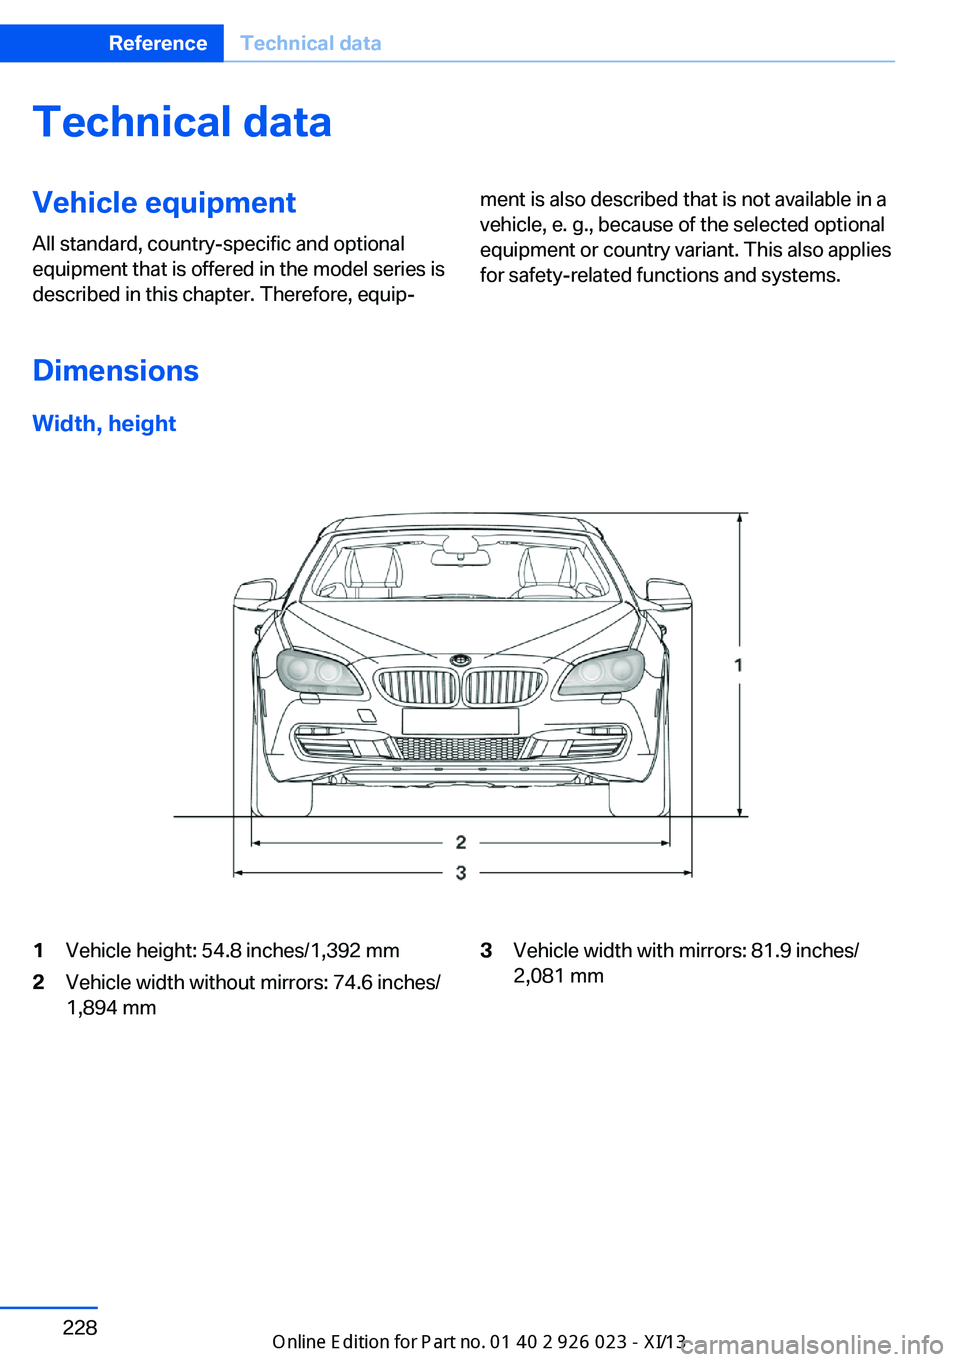 BMW 6 SERIES GRAN COUPE 2013 F12 Owners Manual Technical dataVehicle equipment
All standard, country-specific and optional
equipment that is offered in the model series is
described in this chapter. Therefore, equip‐ment is also described that i